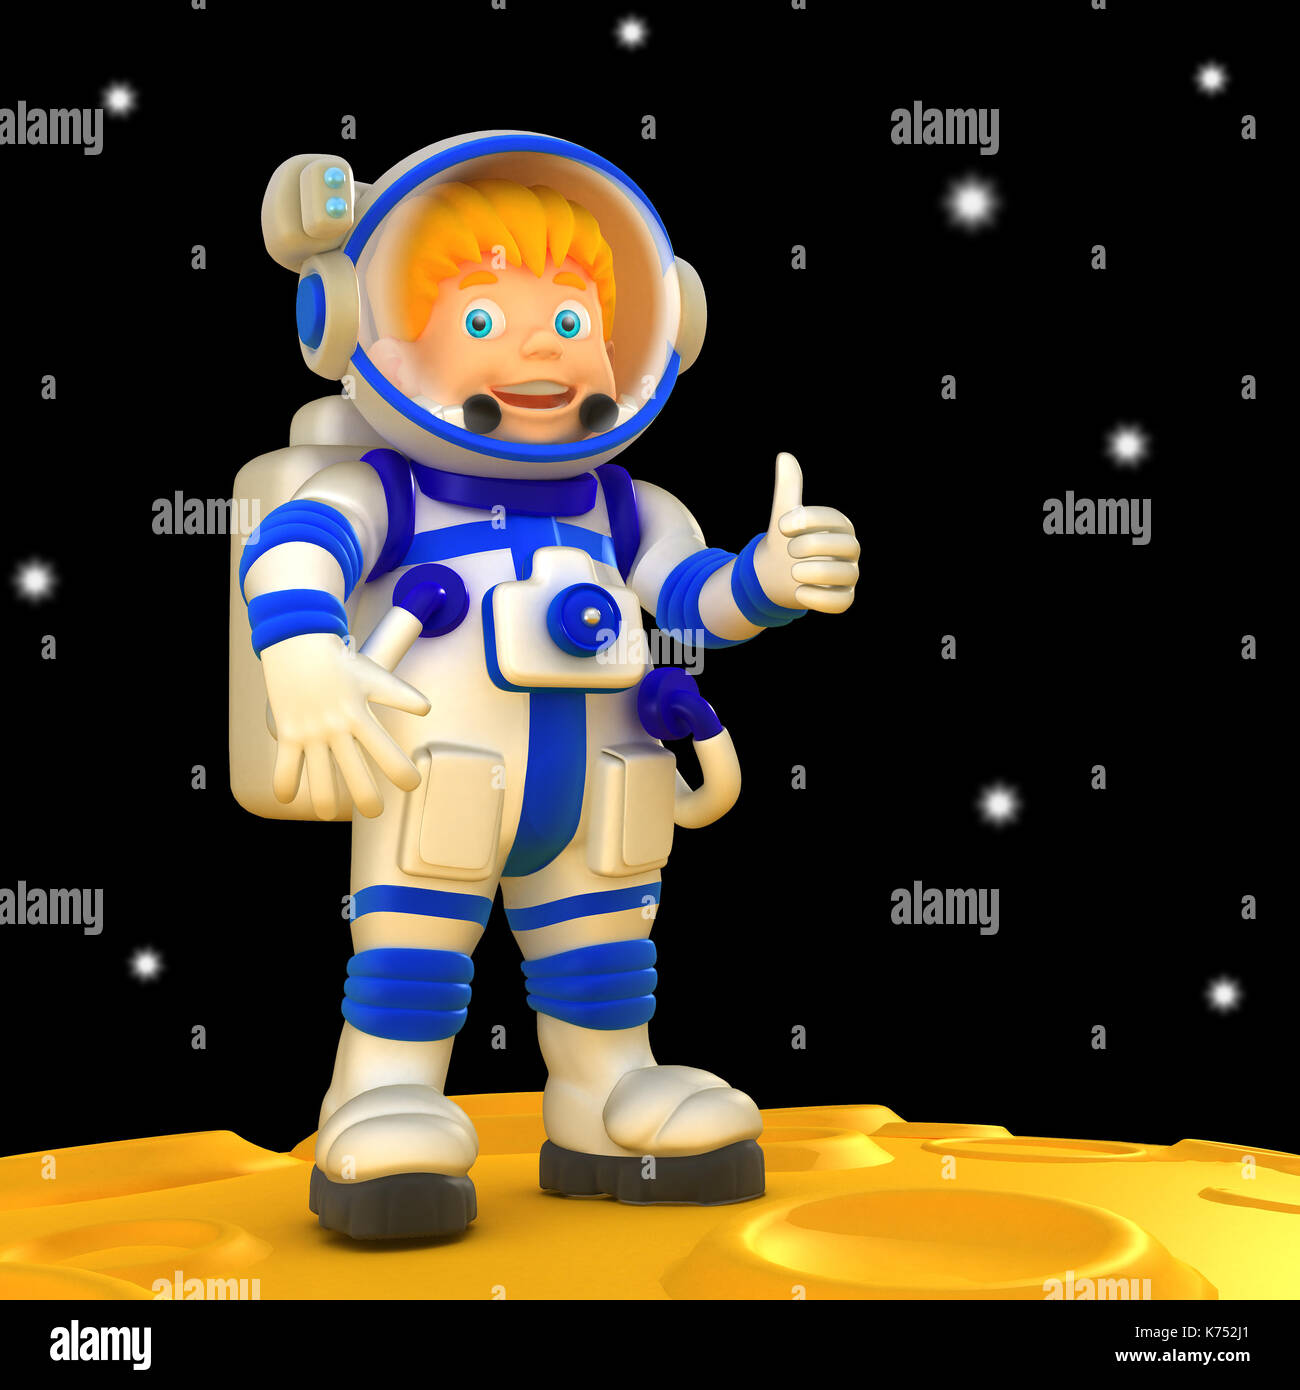 Cartoon spaceman 3D illustration. Funny character in space suit Stock Photo  - Alamy